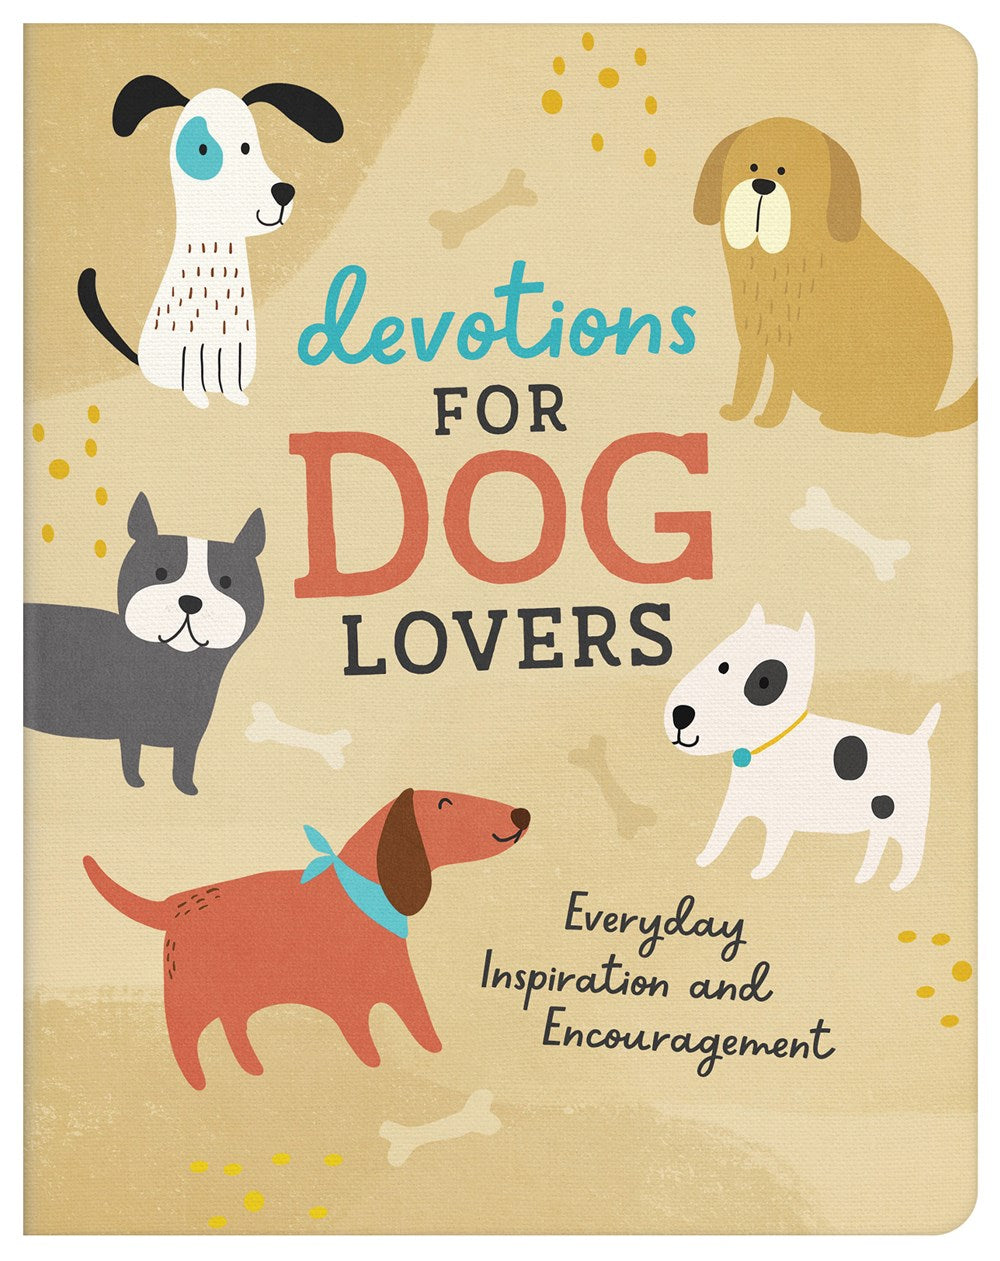 Devotions for Dog Lovers - The Christian Gift Company